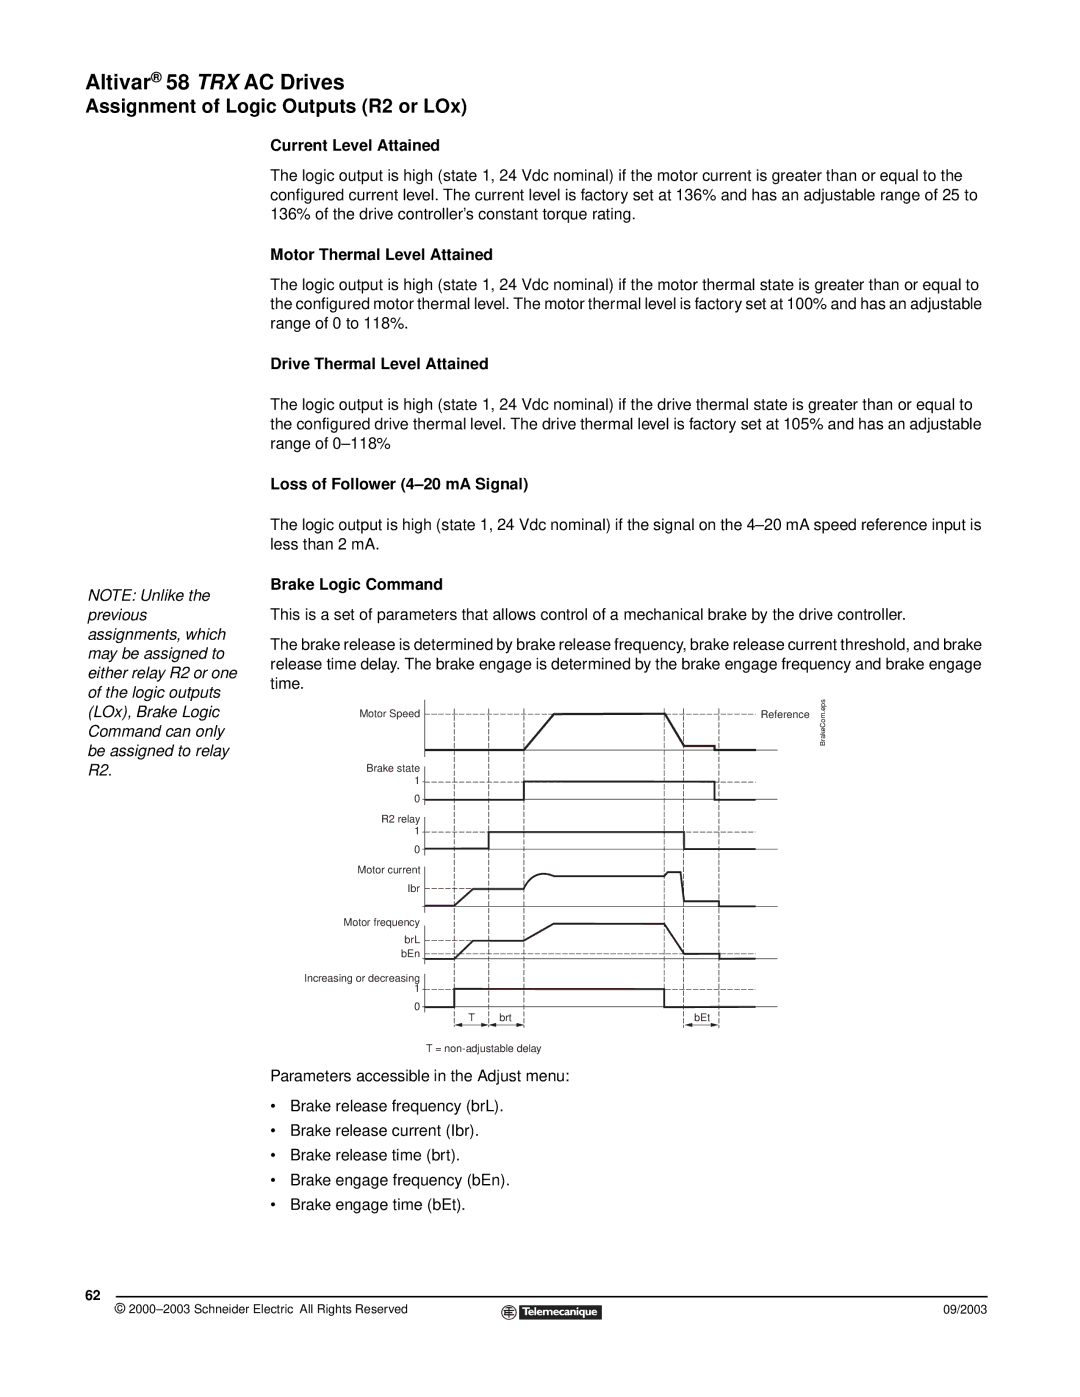 Schneider Electric 58 TRX manual Current Level Attained, Motor Thermal Level Attained, Drive Thermal Level Attained 